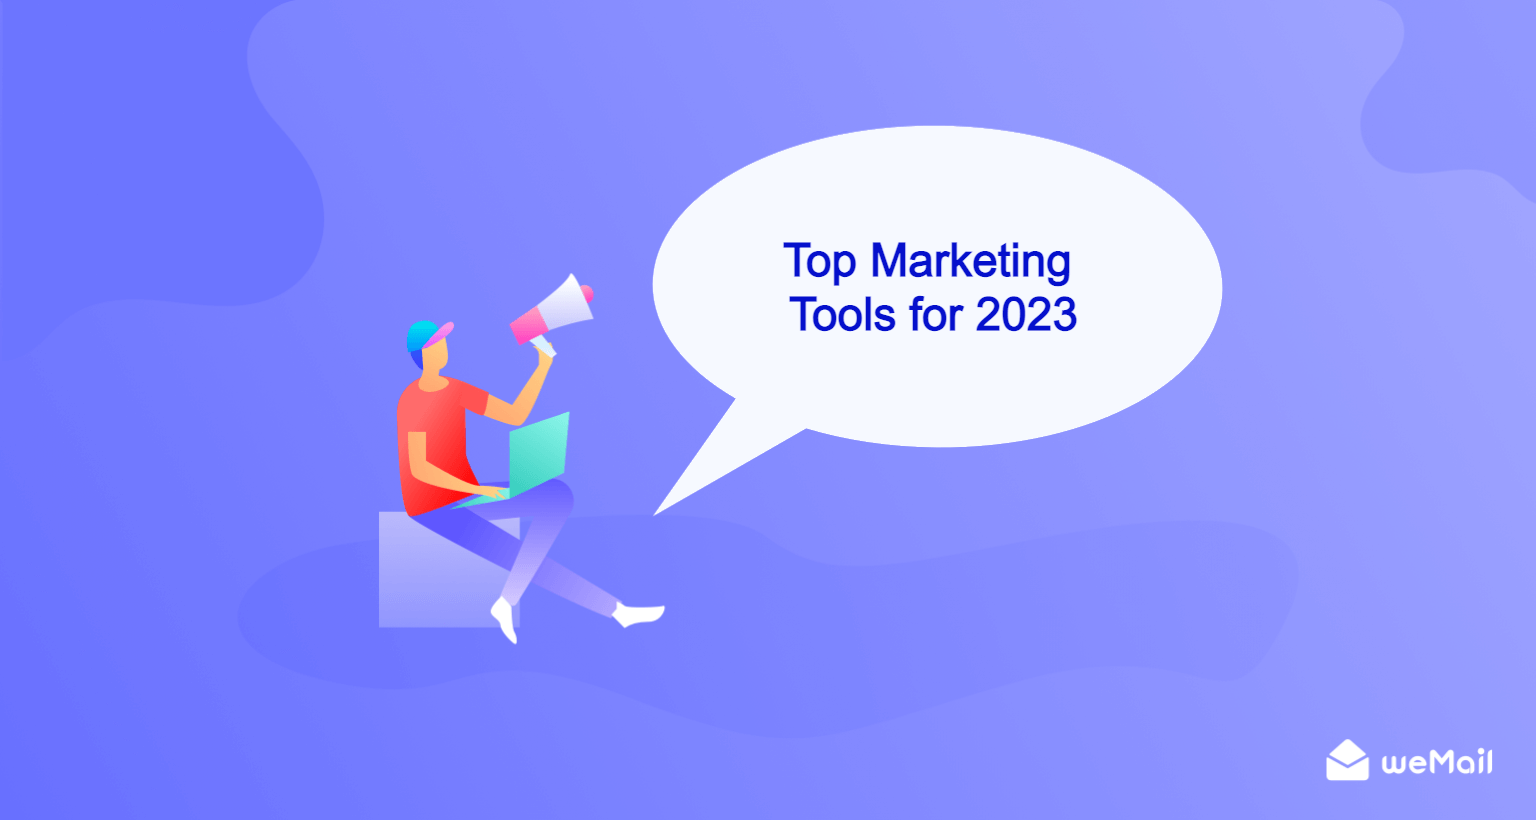 Top Marketing tools for 2023